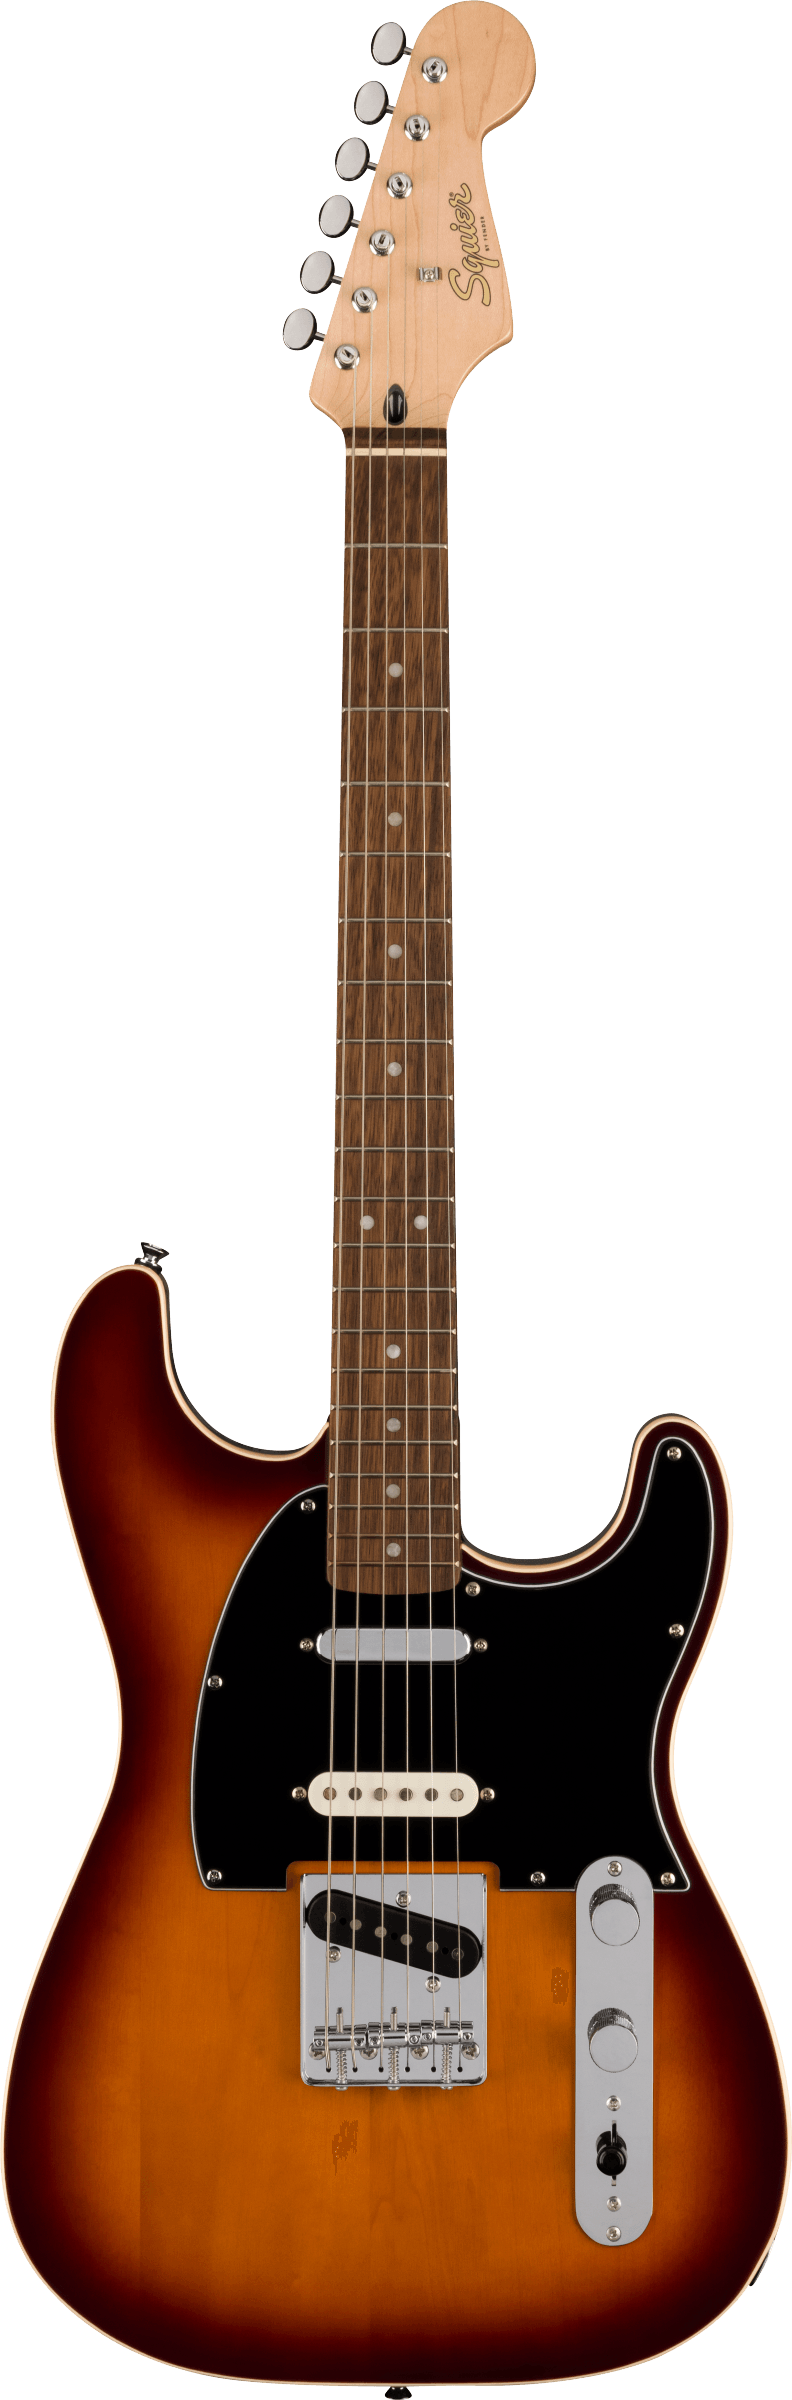 Fender Classic Player Deluxe Stratocaster in Crimson Red - Andertons Music  Co.